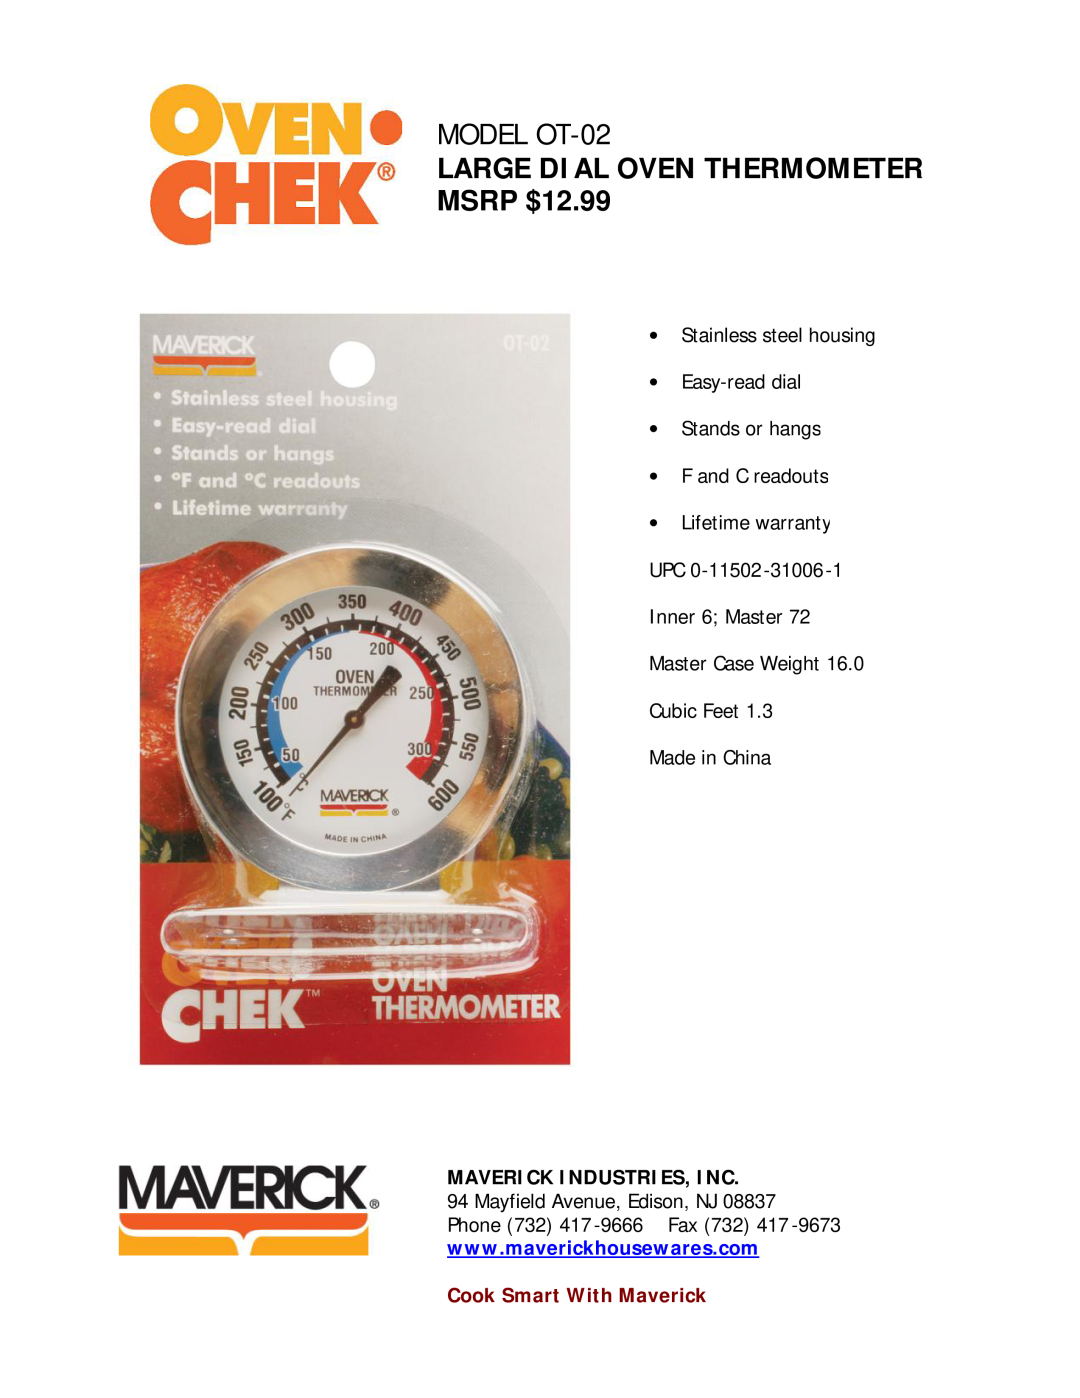 Maverick Ventures warranty MODEL OT-02, Large Dial Oven Thermometer, MSRP $12.99, ∙ F and C readouts, Made in China 